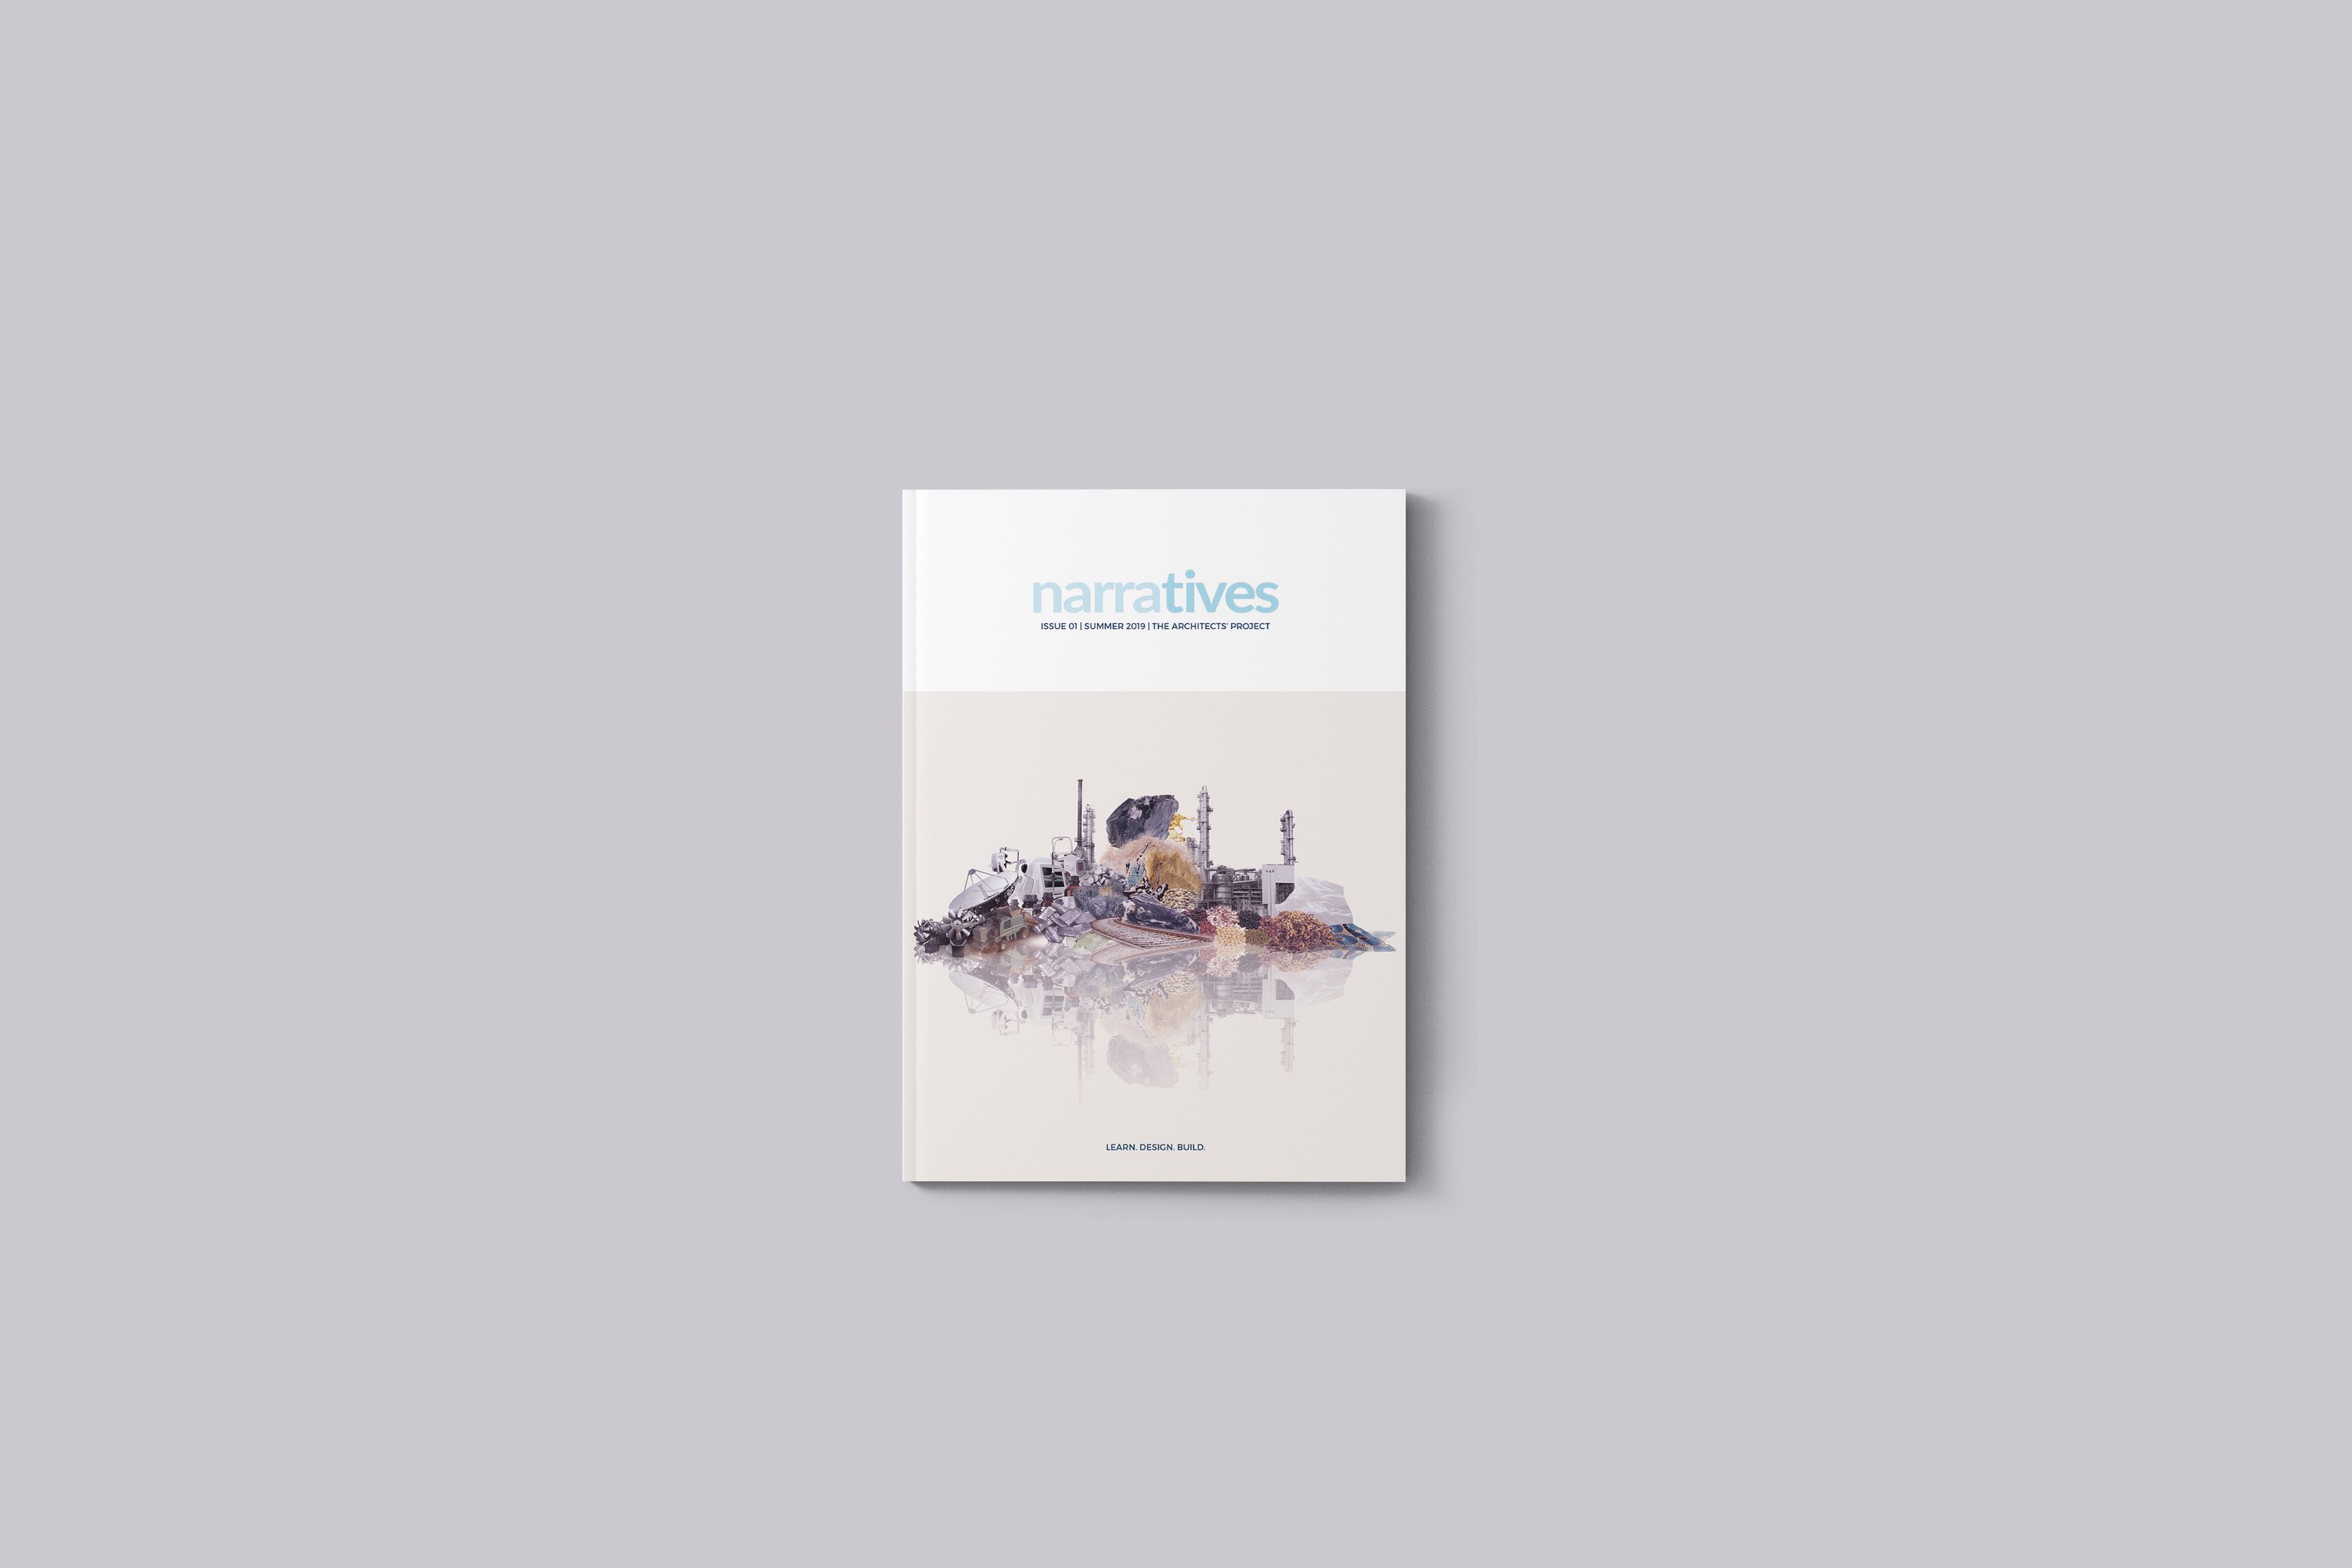 narratives issue 01 - preview, inside pages